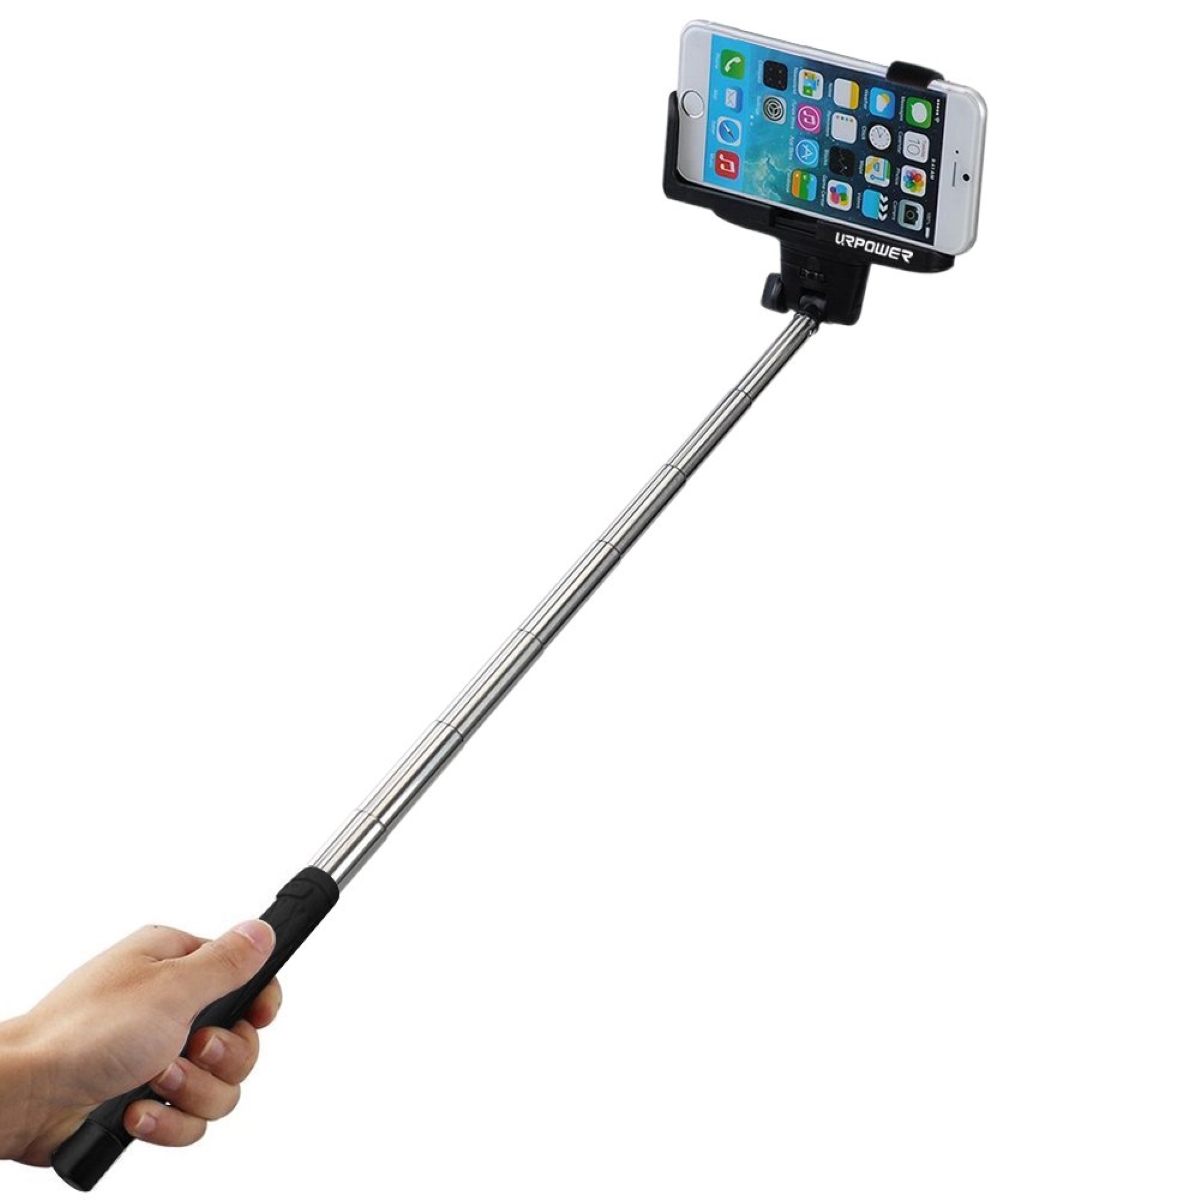 Using Your Urpower Monopod With Android: A Quick Guide